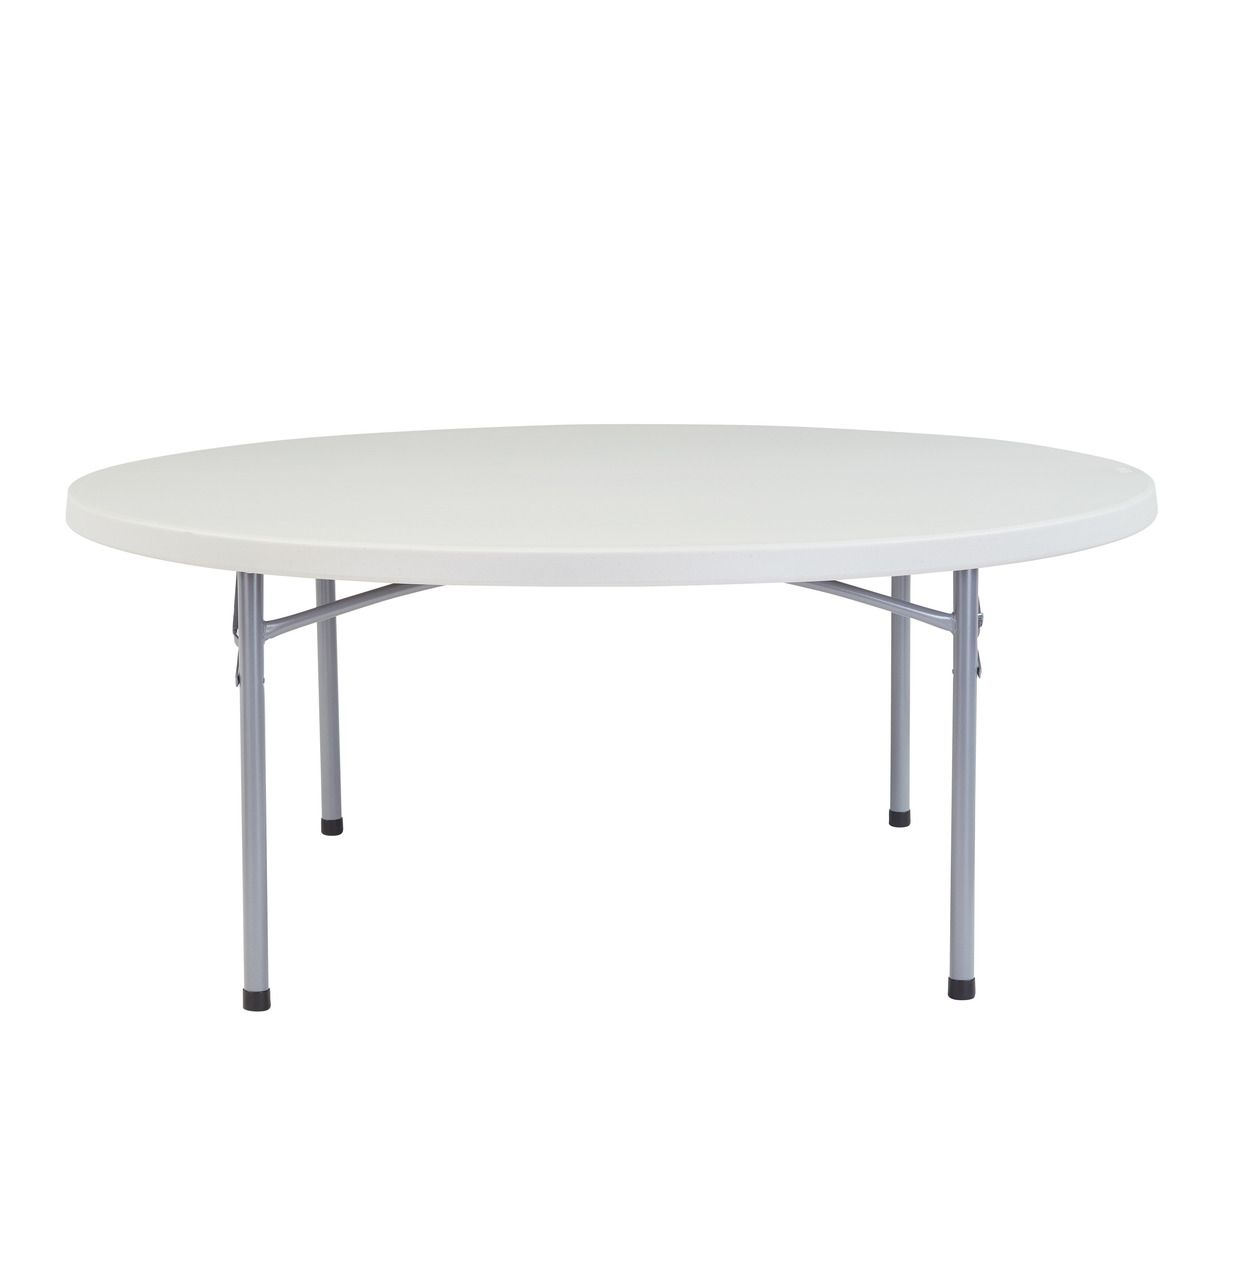 NPS 60" Heavy Duty Round Folding Table - Speckled Grey Top and Grey Frame